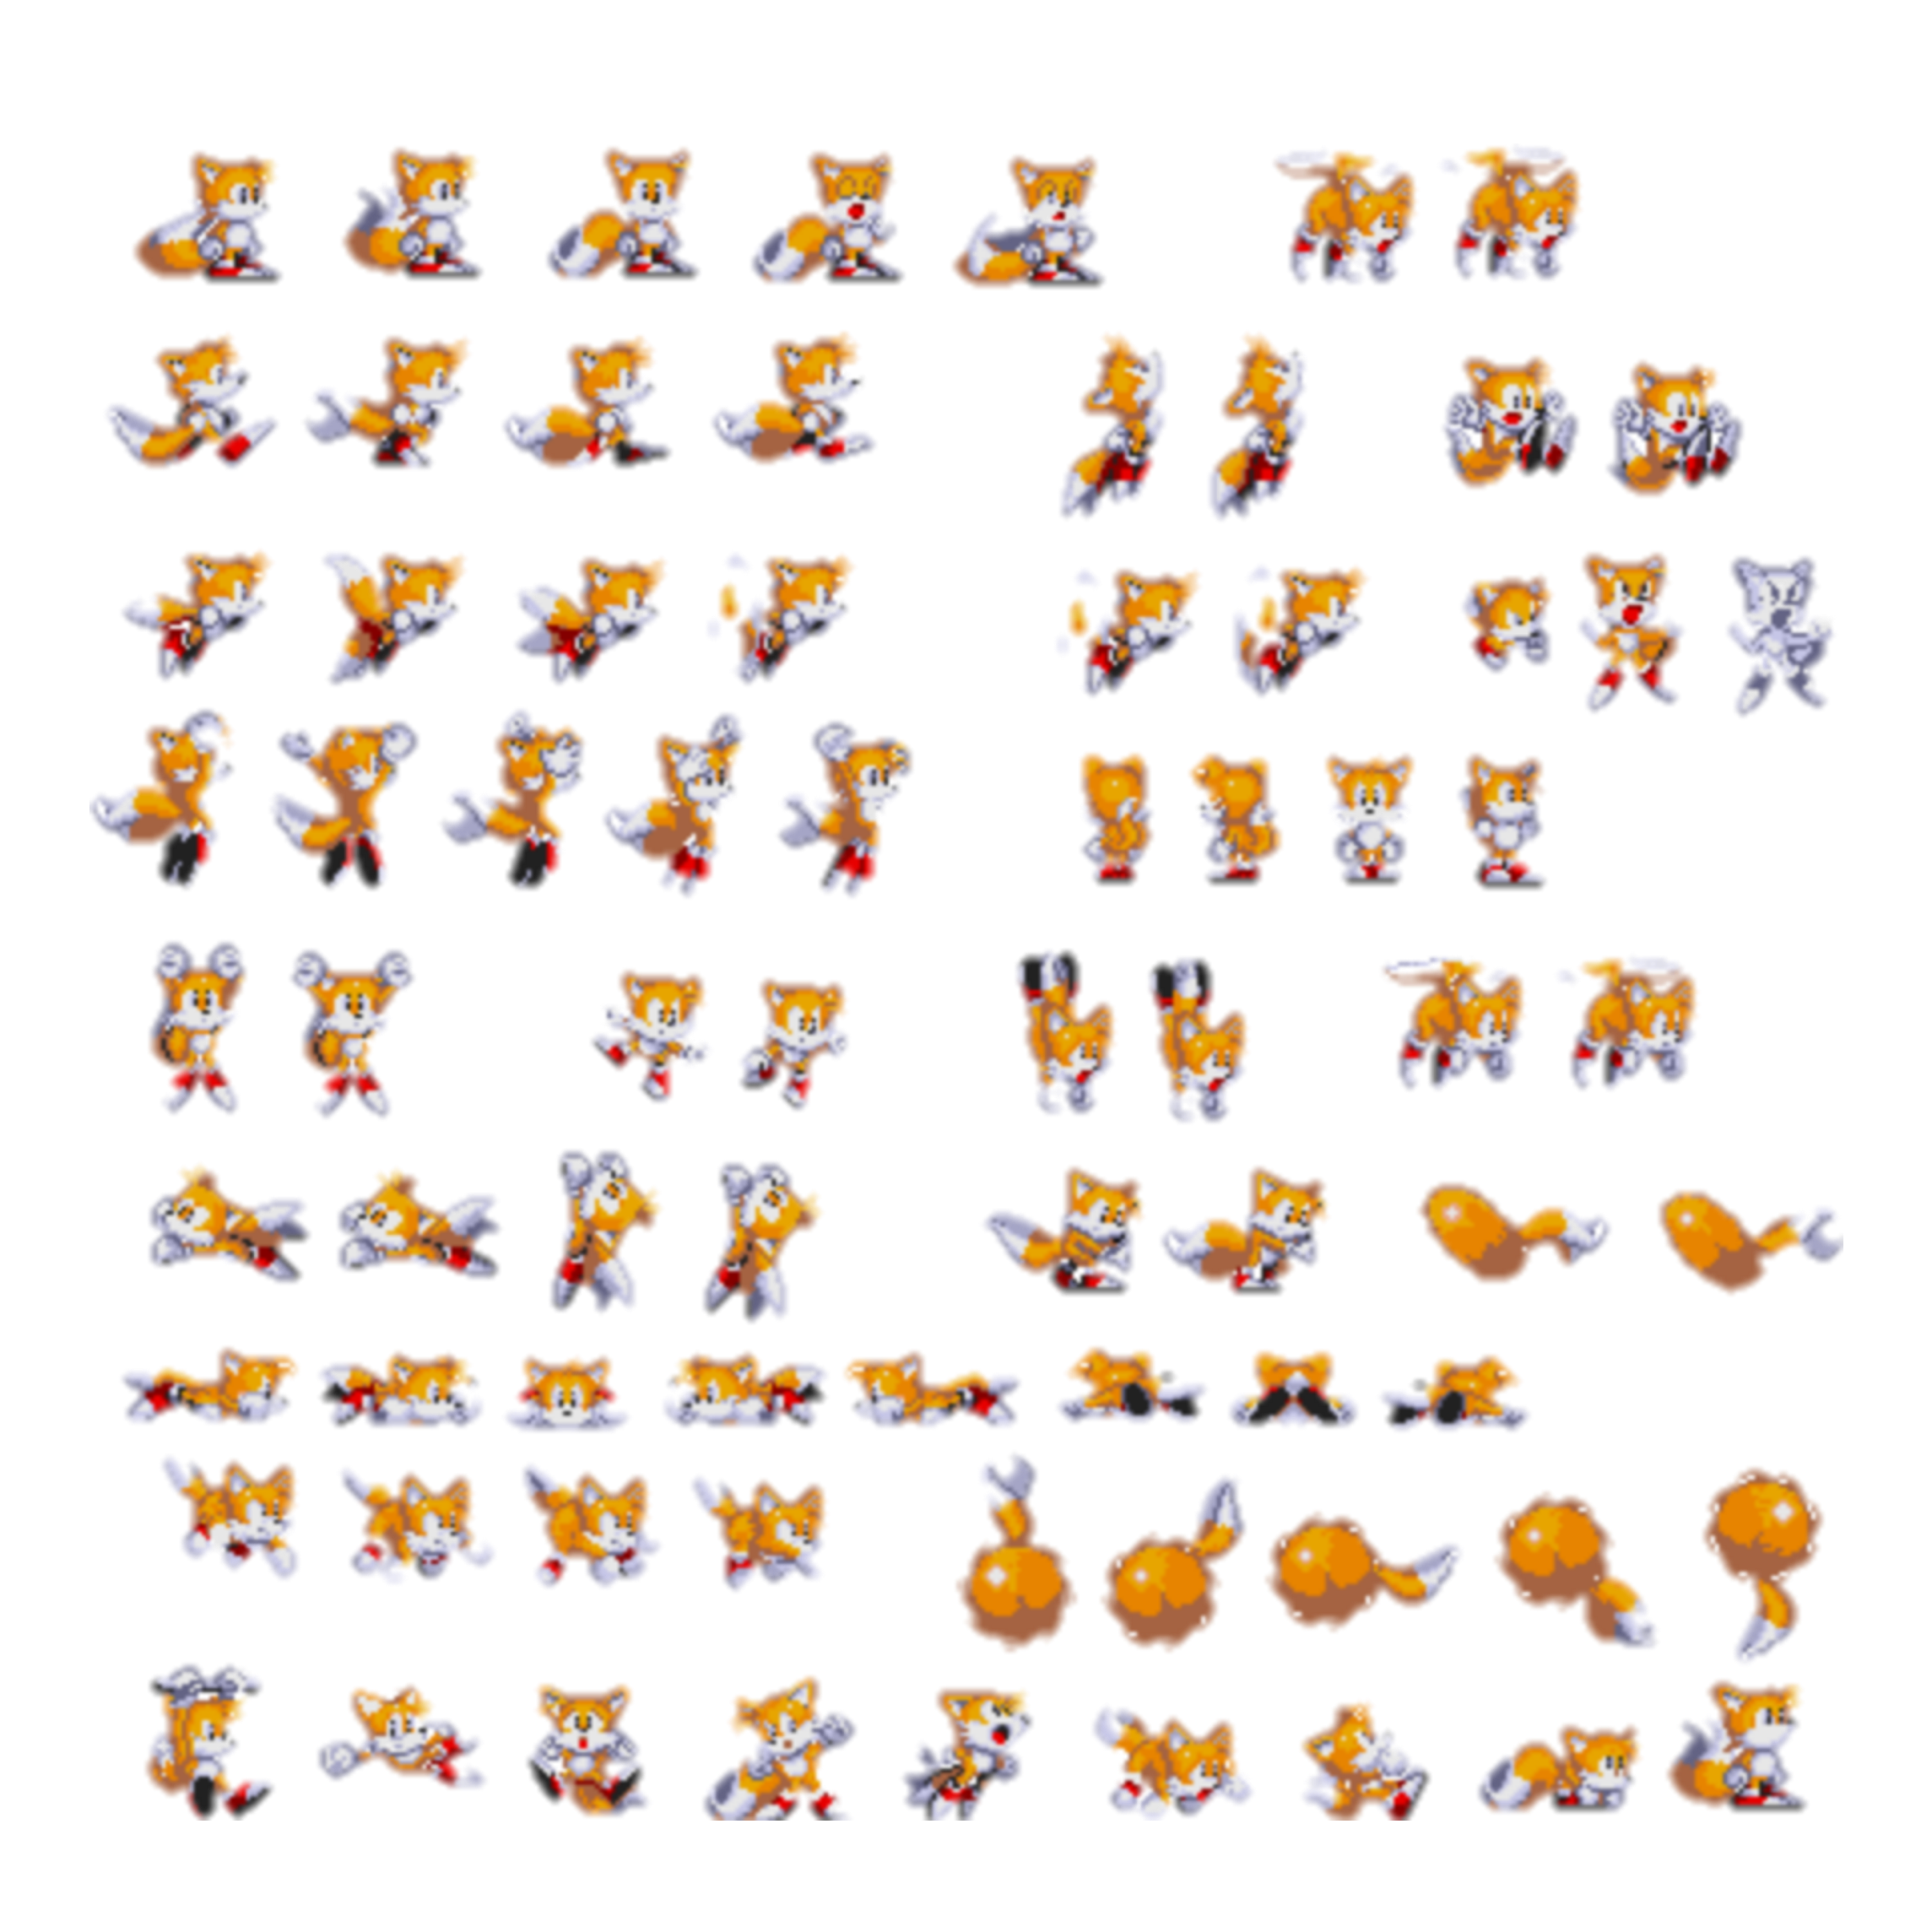 This visual is about freetoedit tailssprite sonicsprite sonic tails classic...